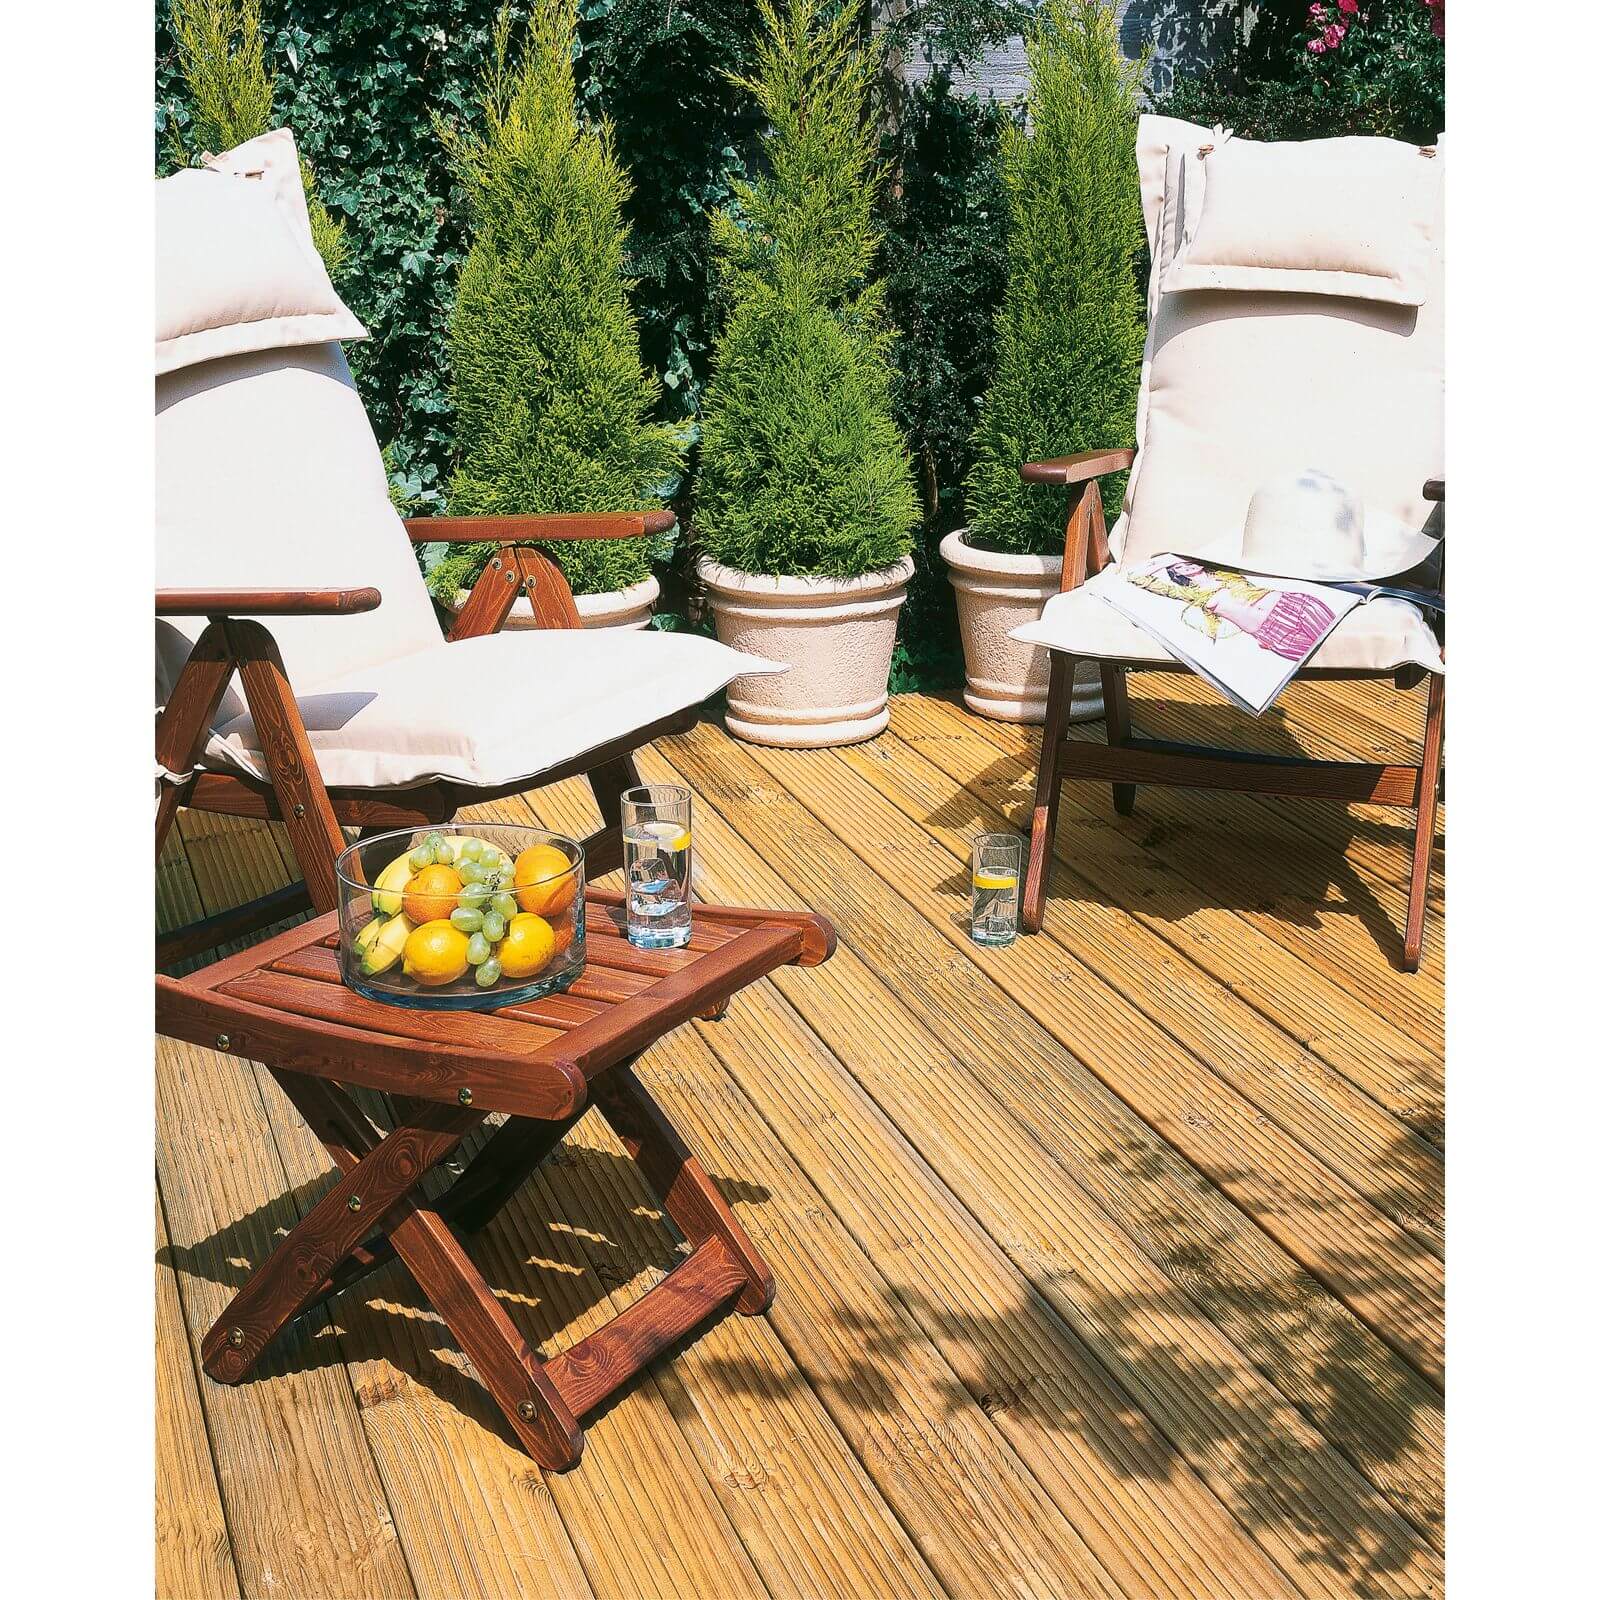 2.4m Patio Deck Board - Pack of 50